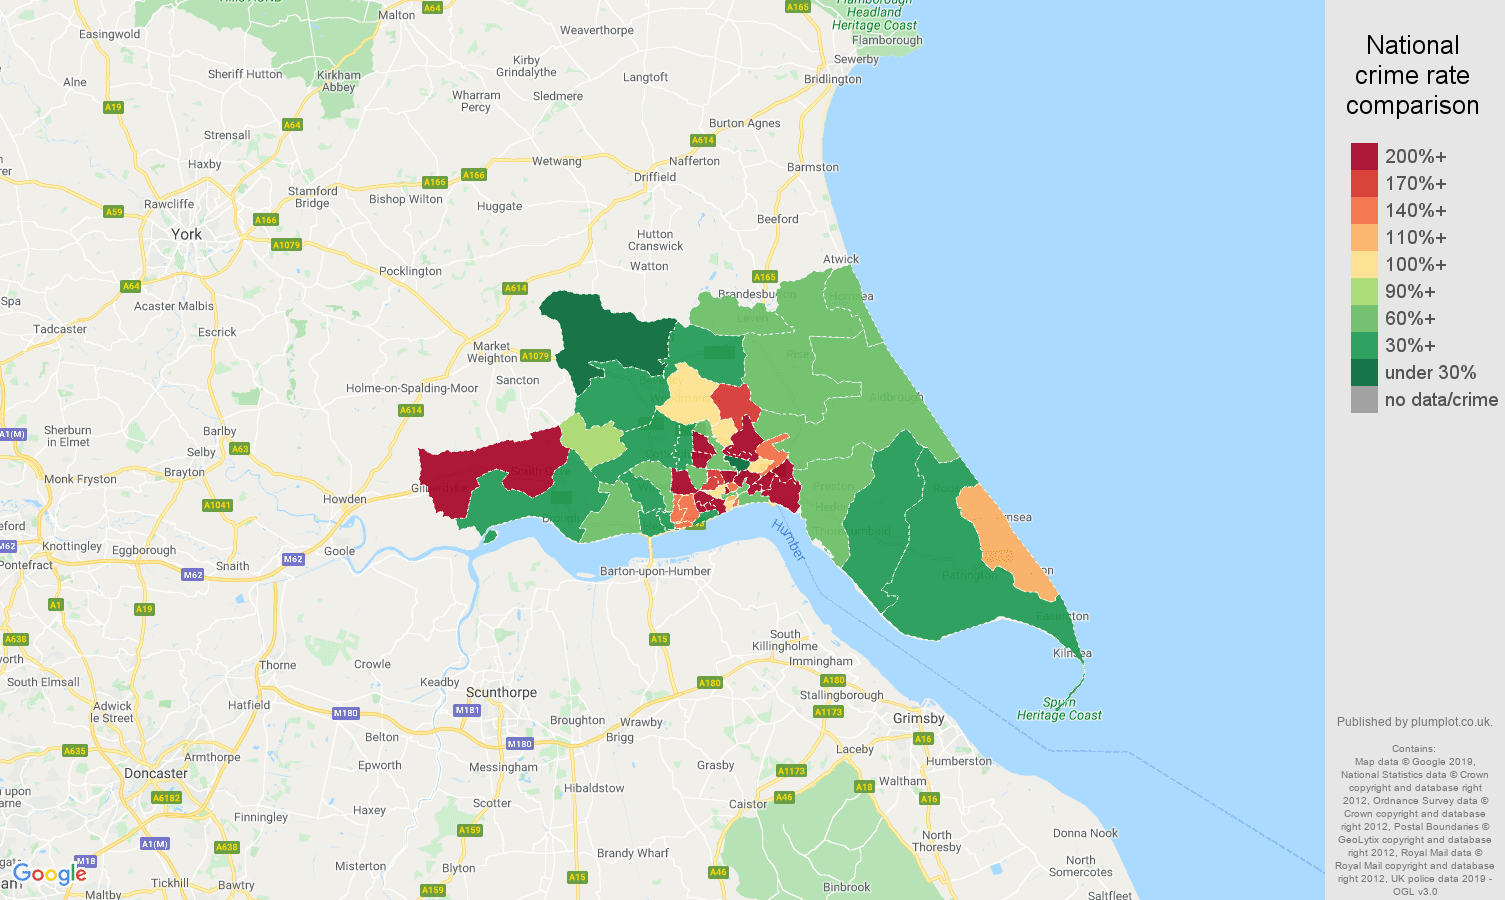 Hull other crime rate comparison map